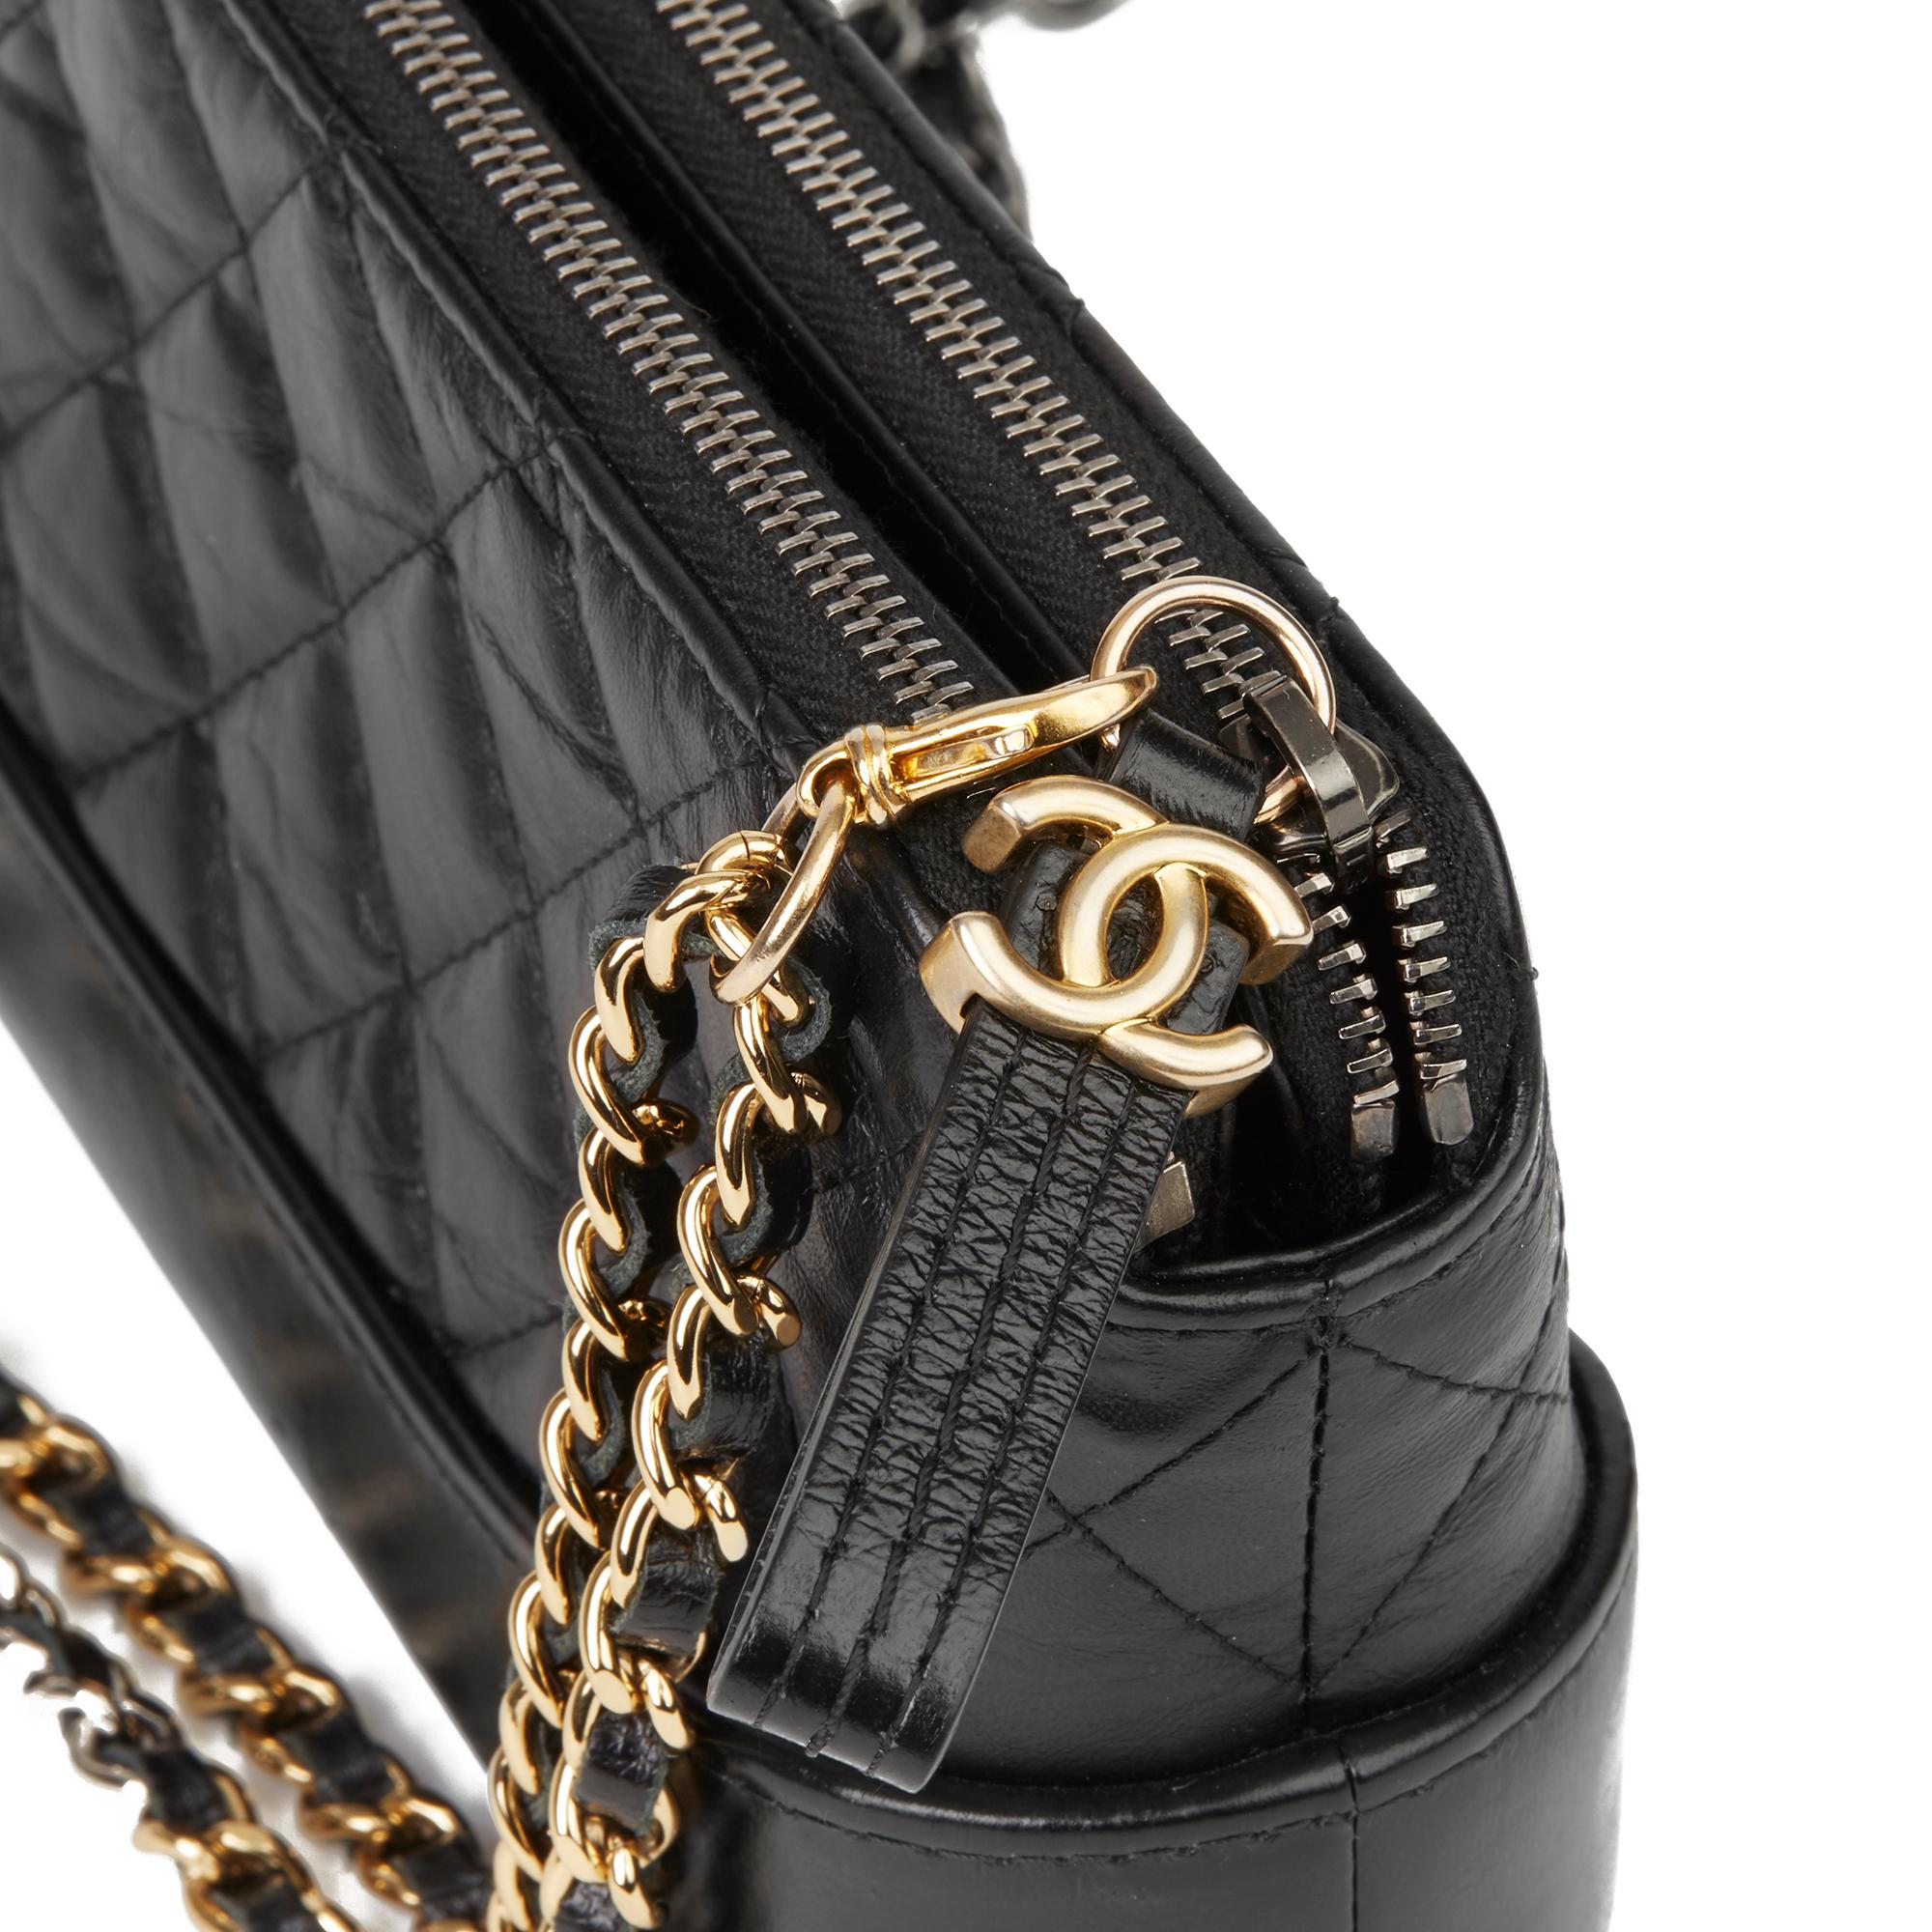 Women's 2018 Chanel Black Quilted Aged Calfskin Leather Gabrielle Clutch-with-Chain CWC